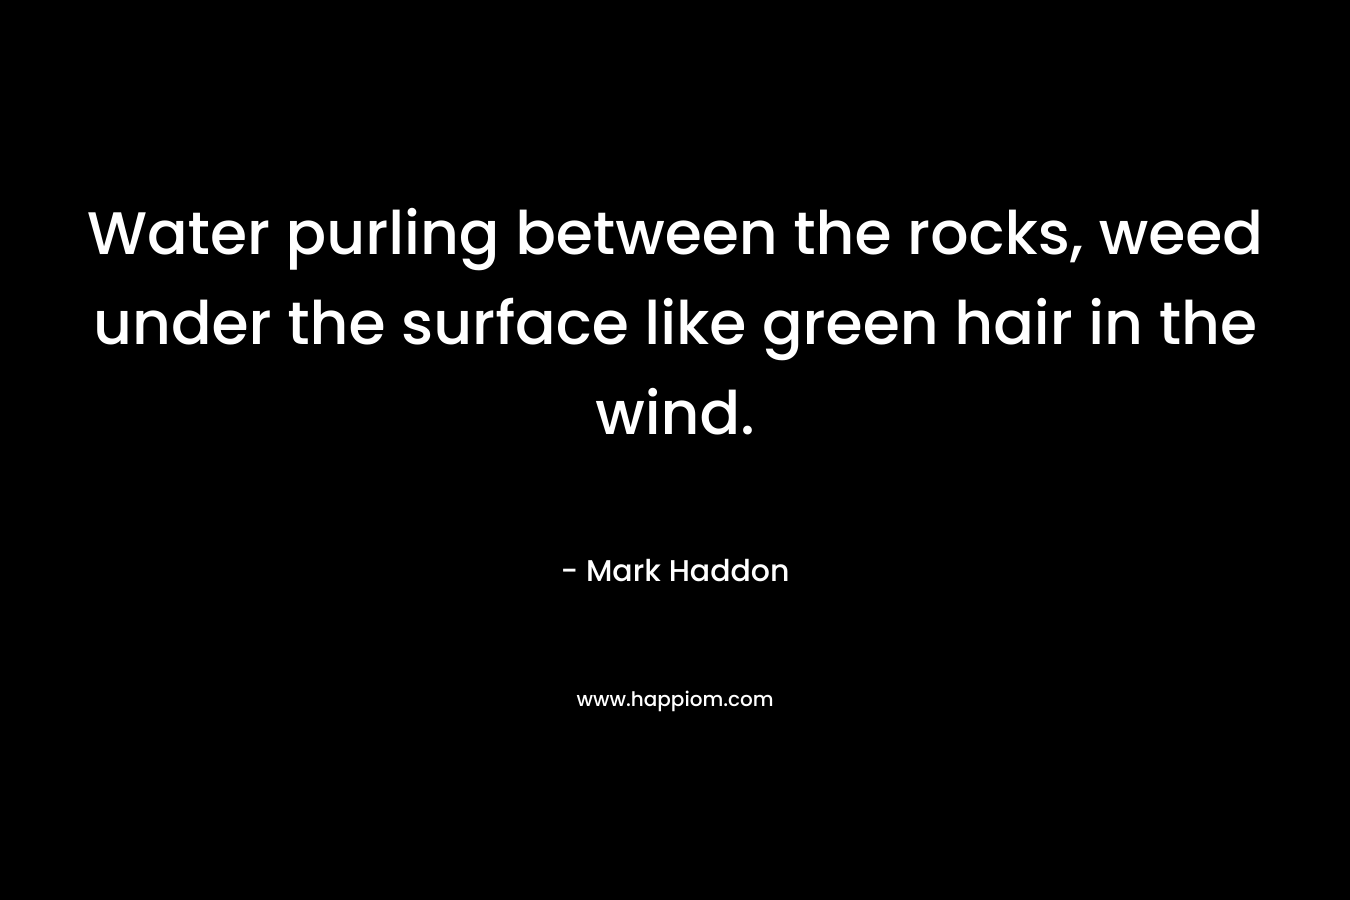 Water purling between the rocks, weed under the surface like green hair in the wind. – Mark Haddon